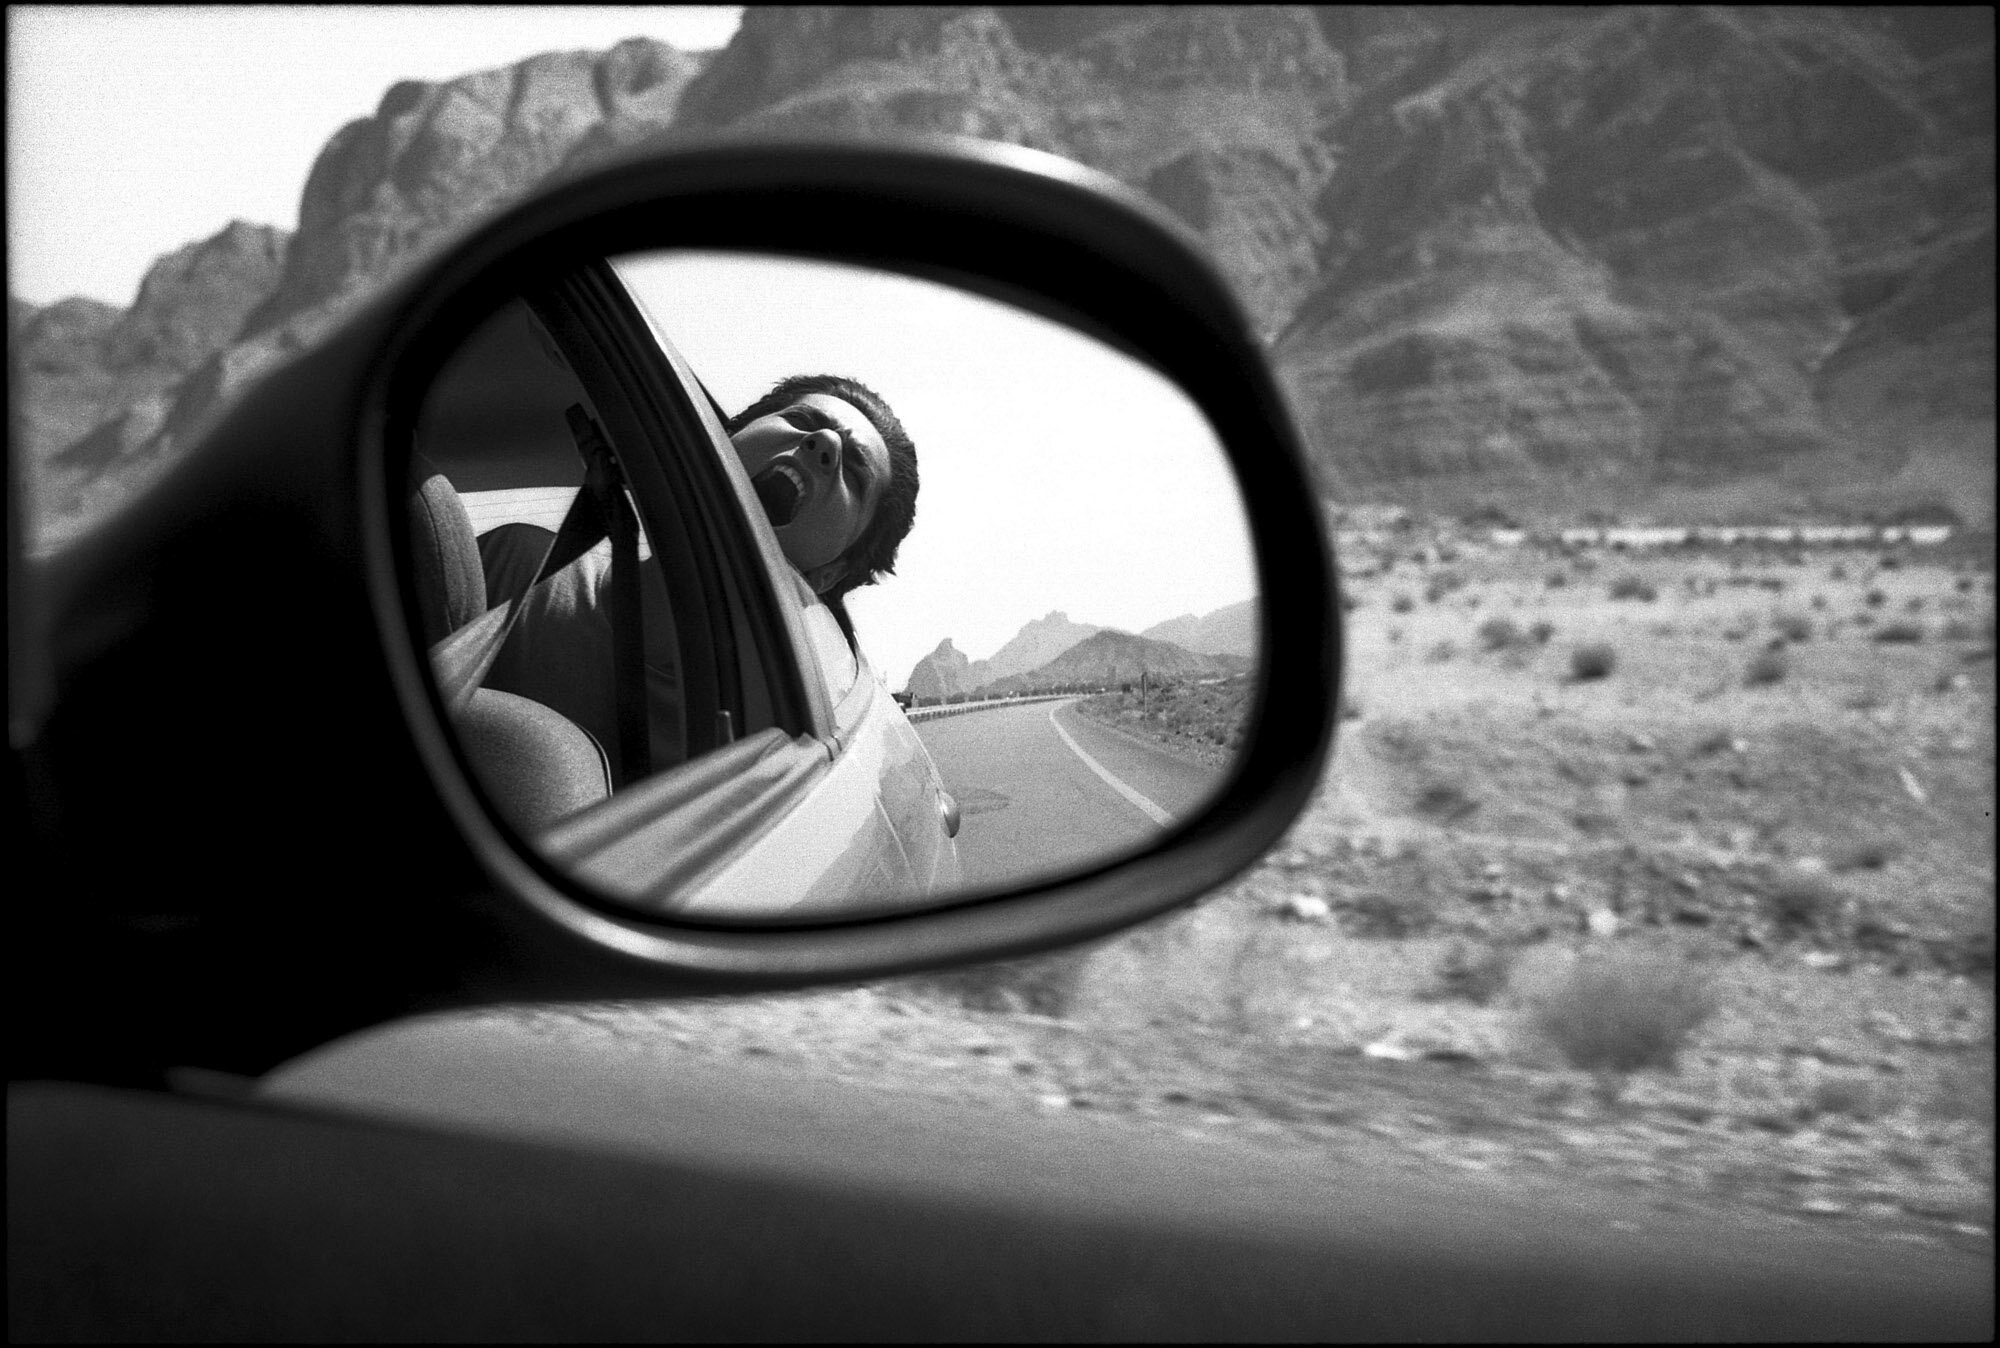  On the road to Yazd, a desert landscape and Mehrad screaming in the rear-view mirror of a Peugeot 206. Yazd, Iran, October 1, 2015. 